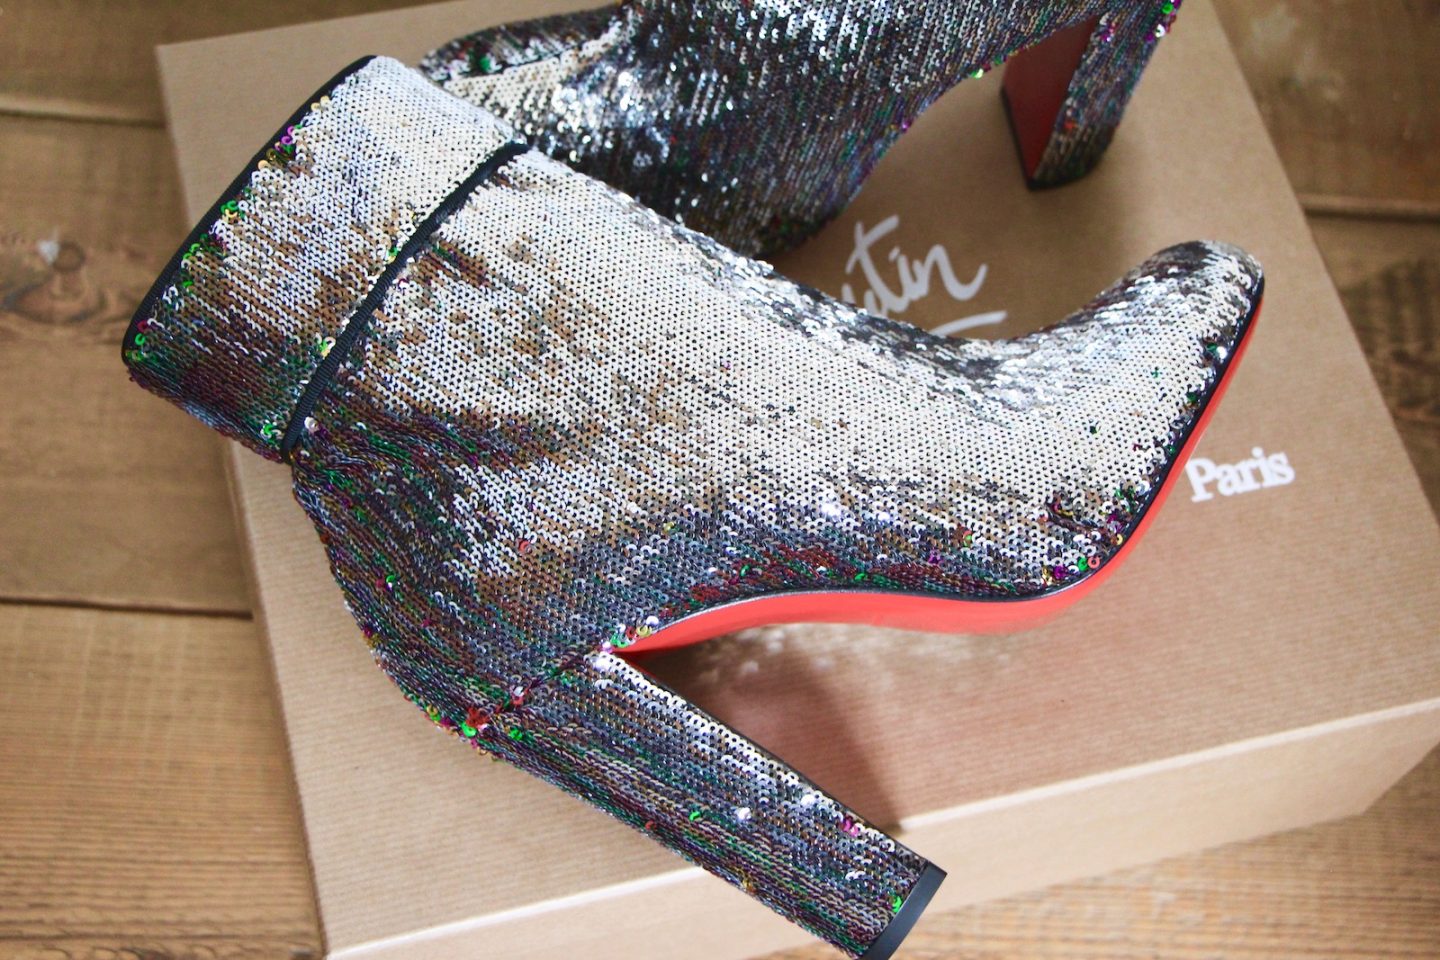 Christian Louboutin Sequin Boots: It's 